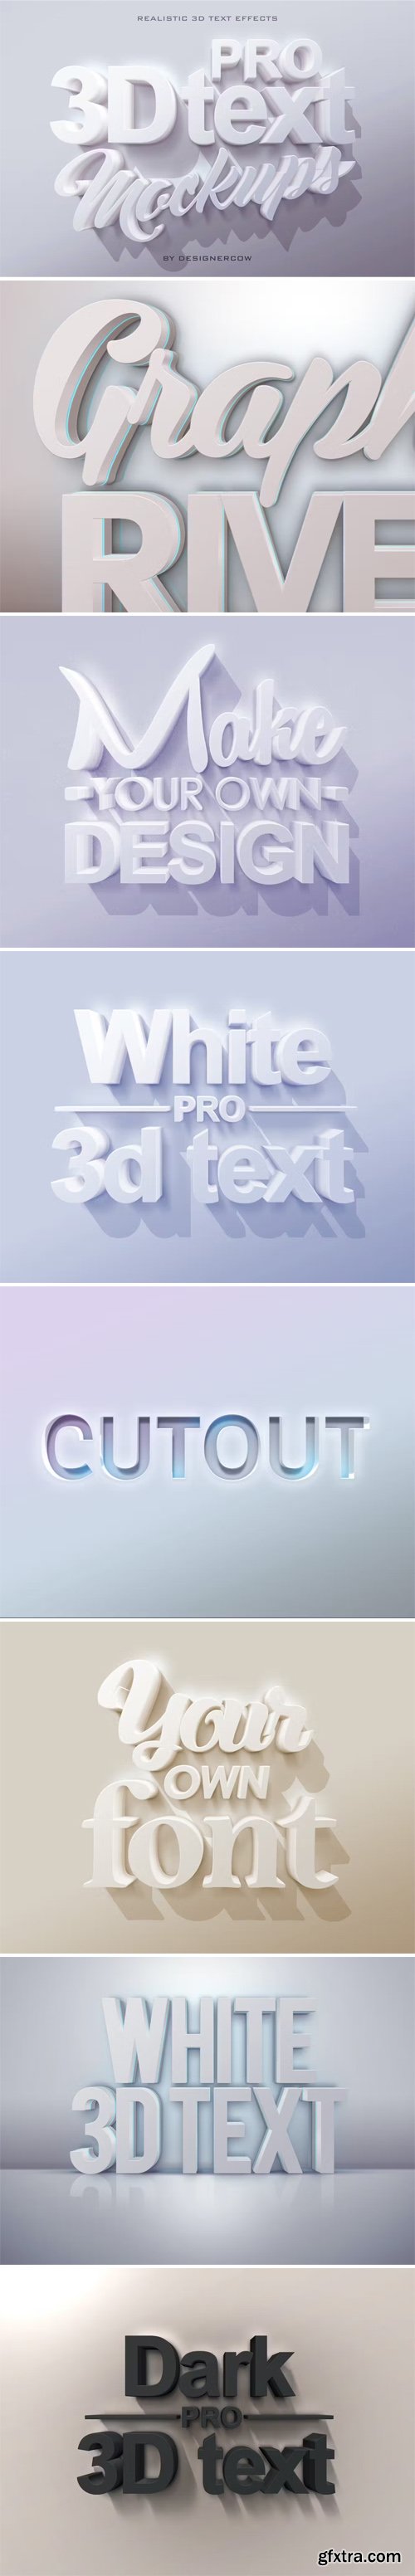 Pro 3D Text Mockups for Photoshop [Re-Up]